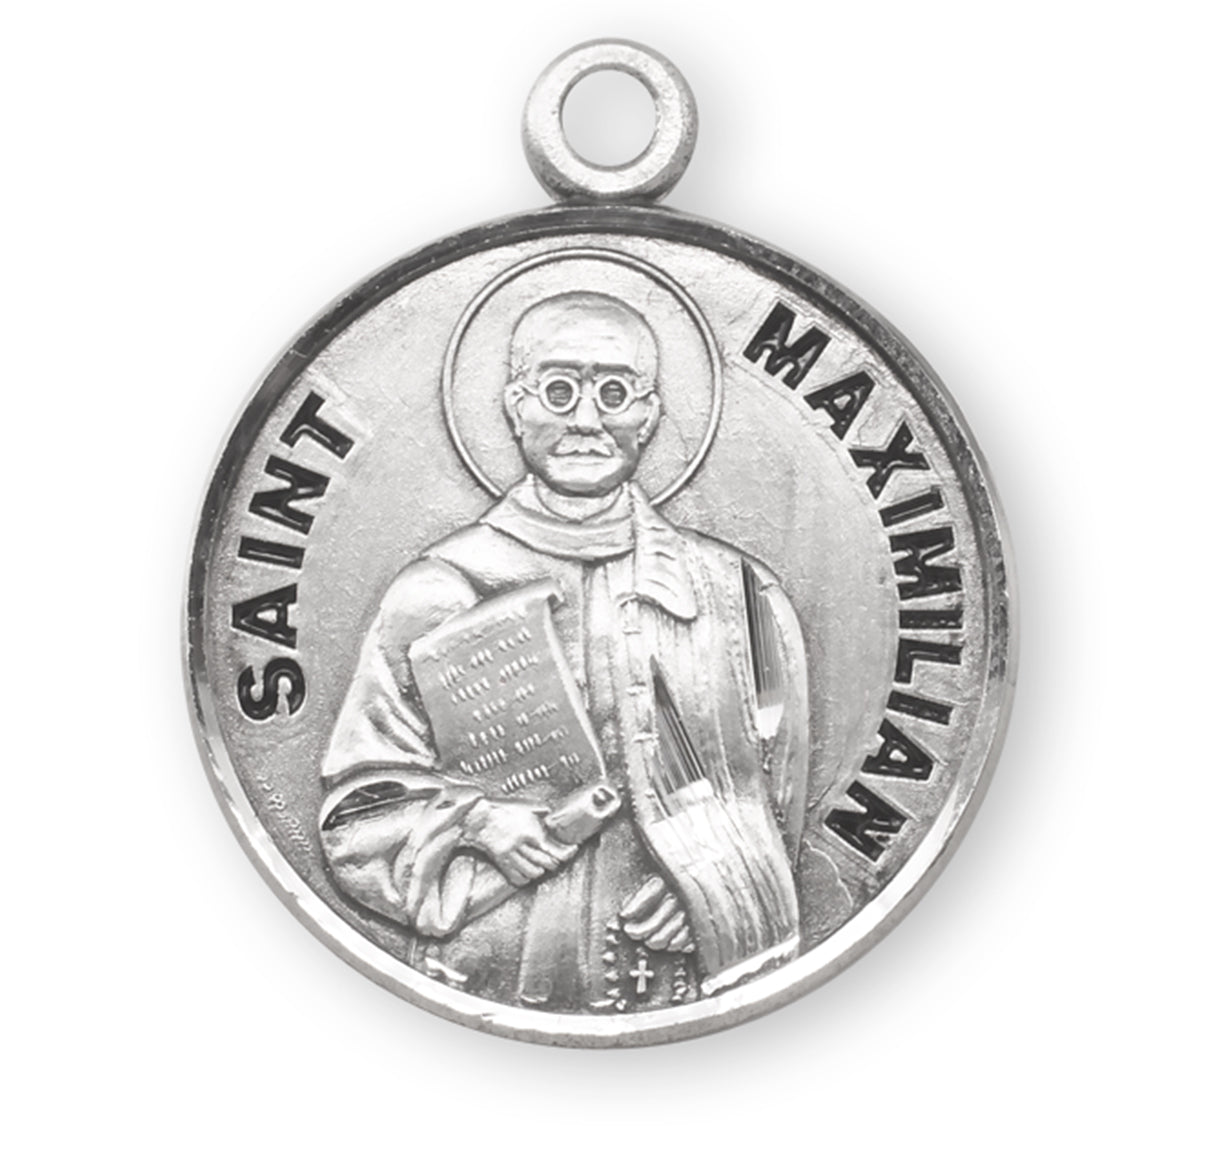 St. Maximilian Sterling Silver Medal Necklace